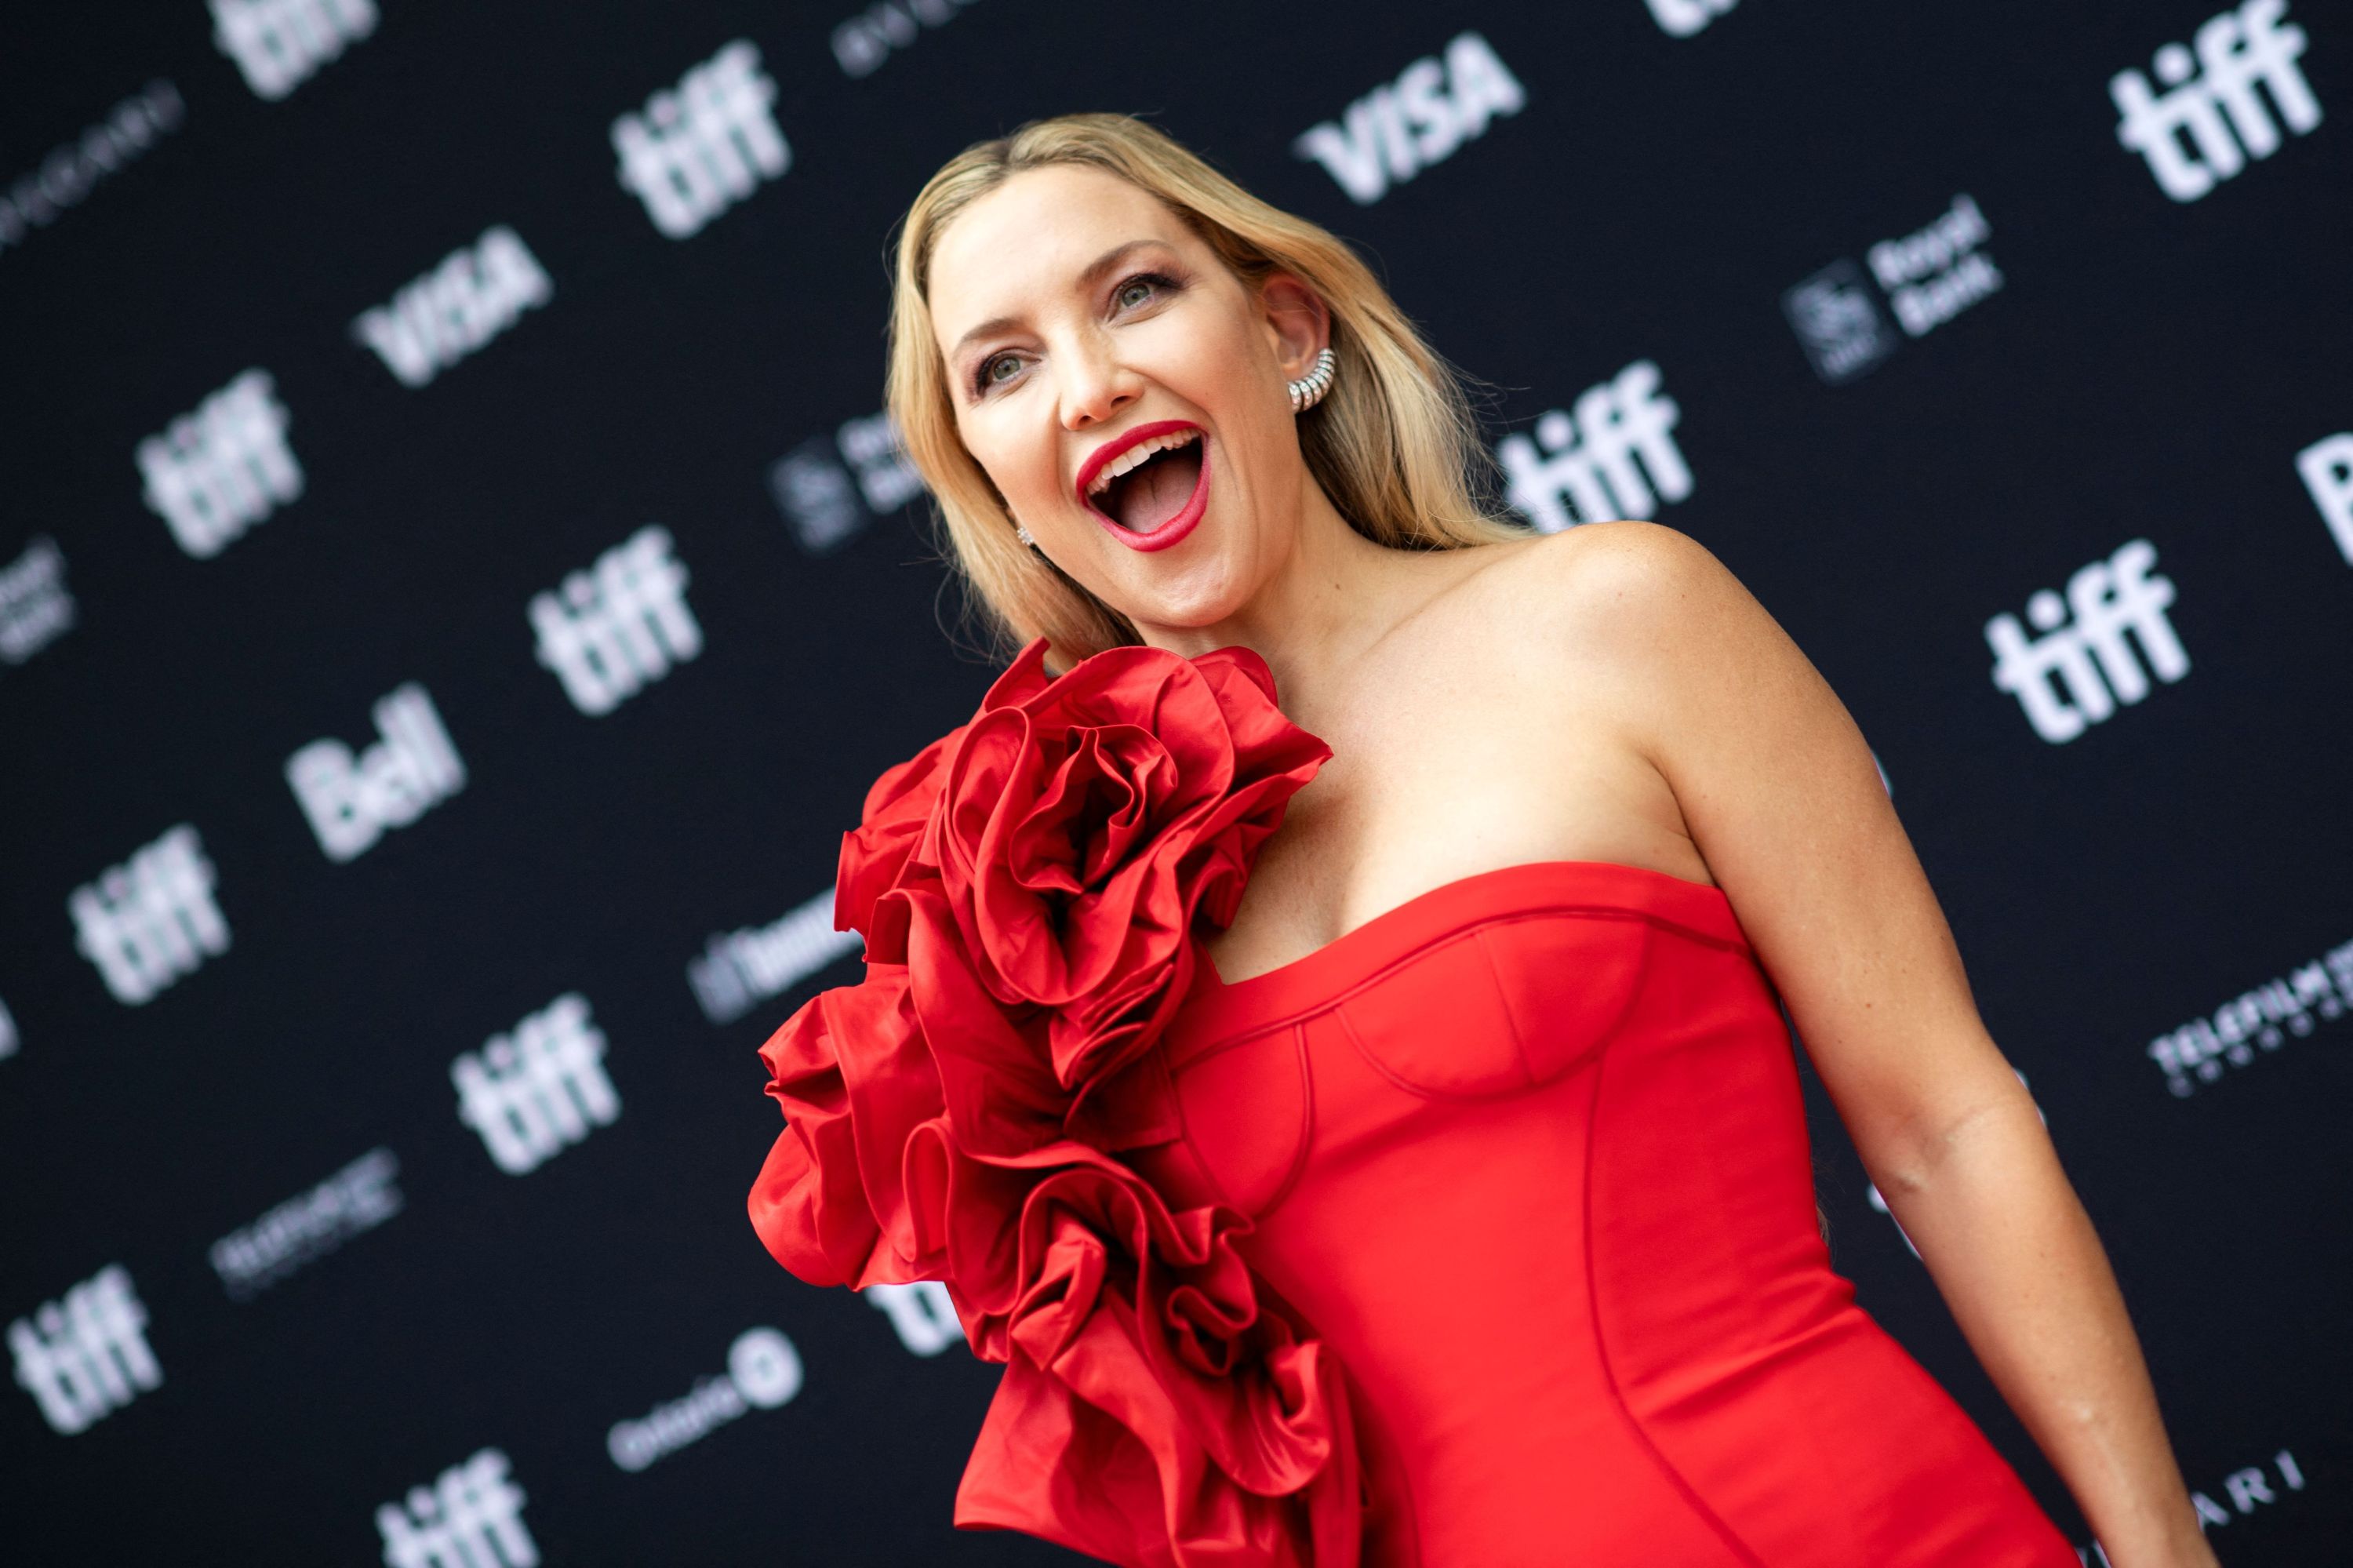 US actress Kate Hudson arrives for the premiere of "Glass Onion: A Knives Out Mystery" during the Toronto International Film Festival in Toronto, Canada, on September 10, 2022. (Photo by VALERIE MACON / AFP) (Photo by VALERIE MACON/AFP via Getty Images)